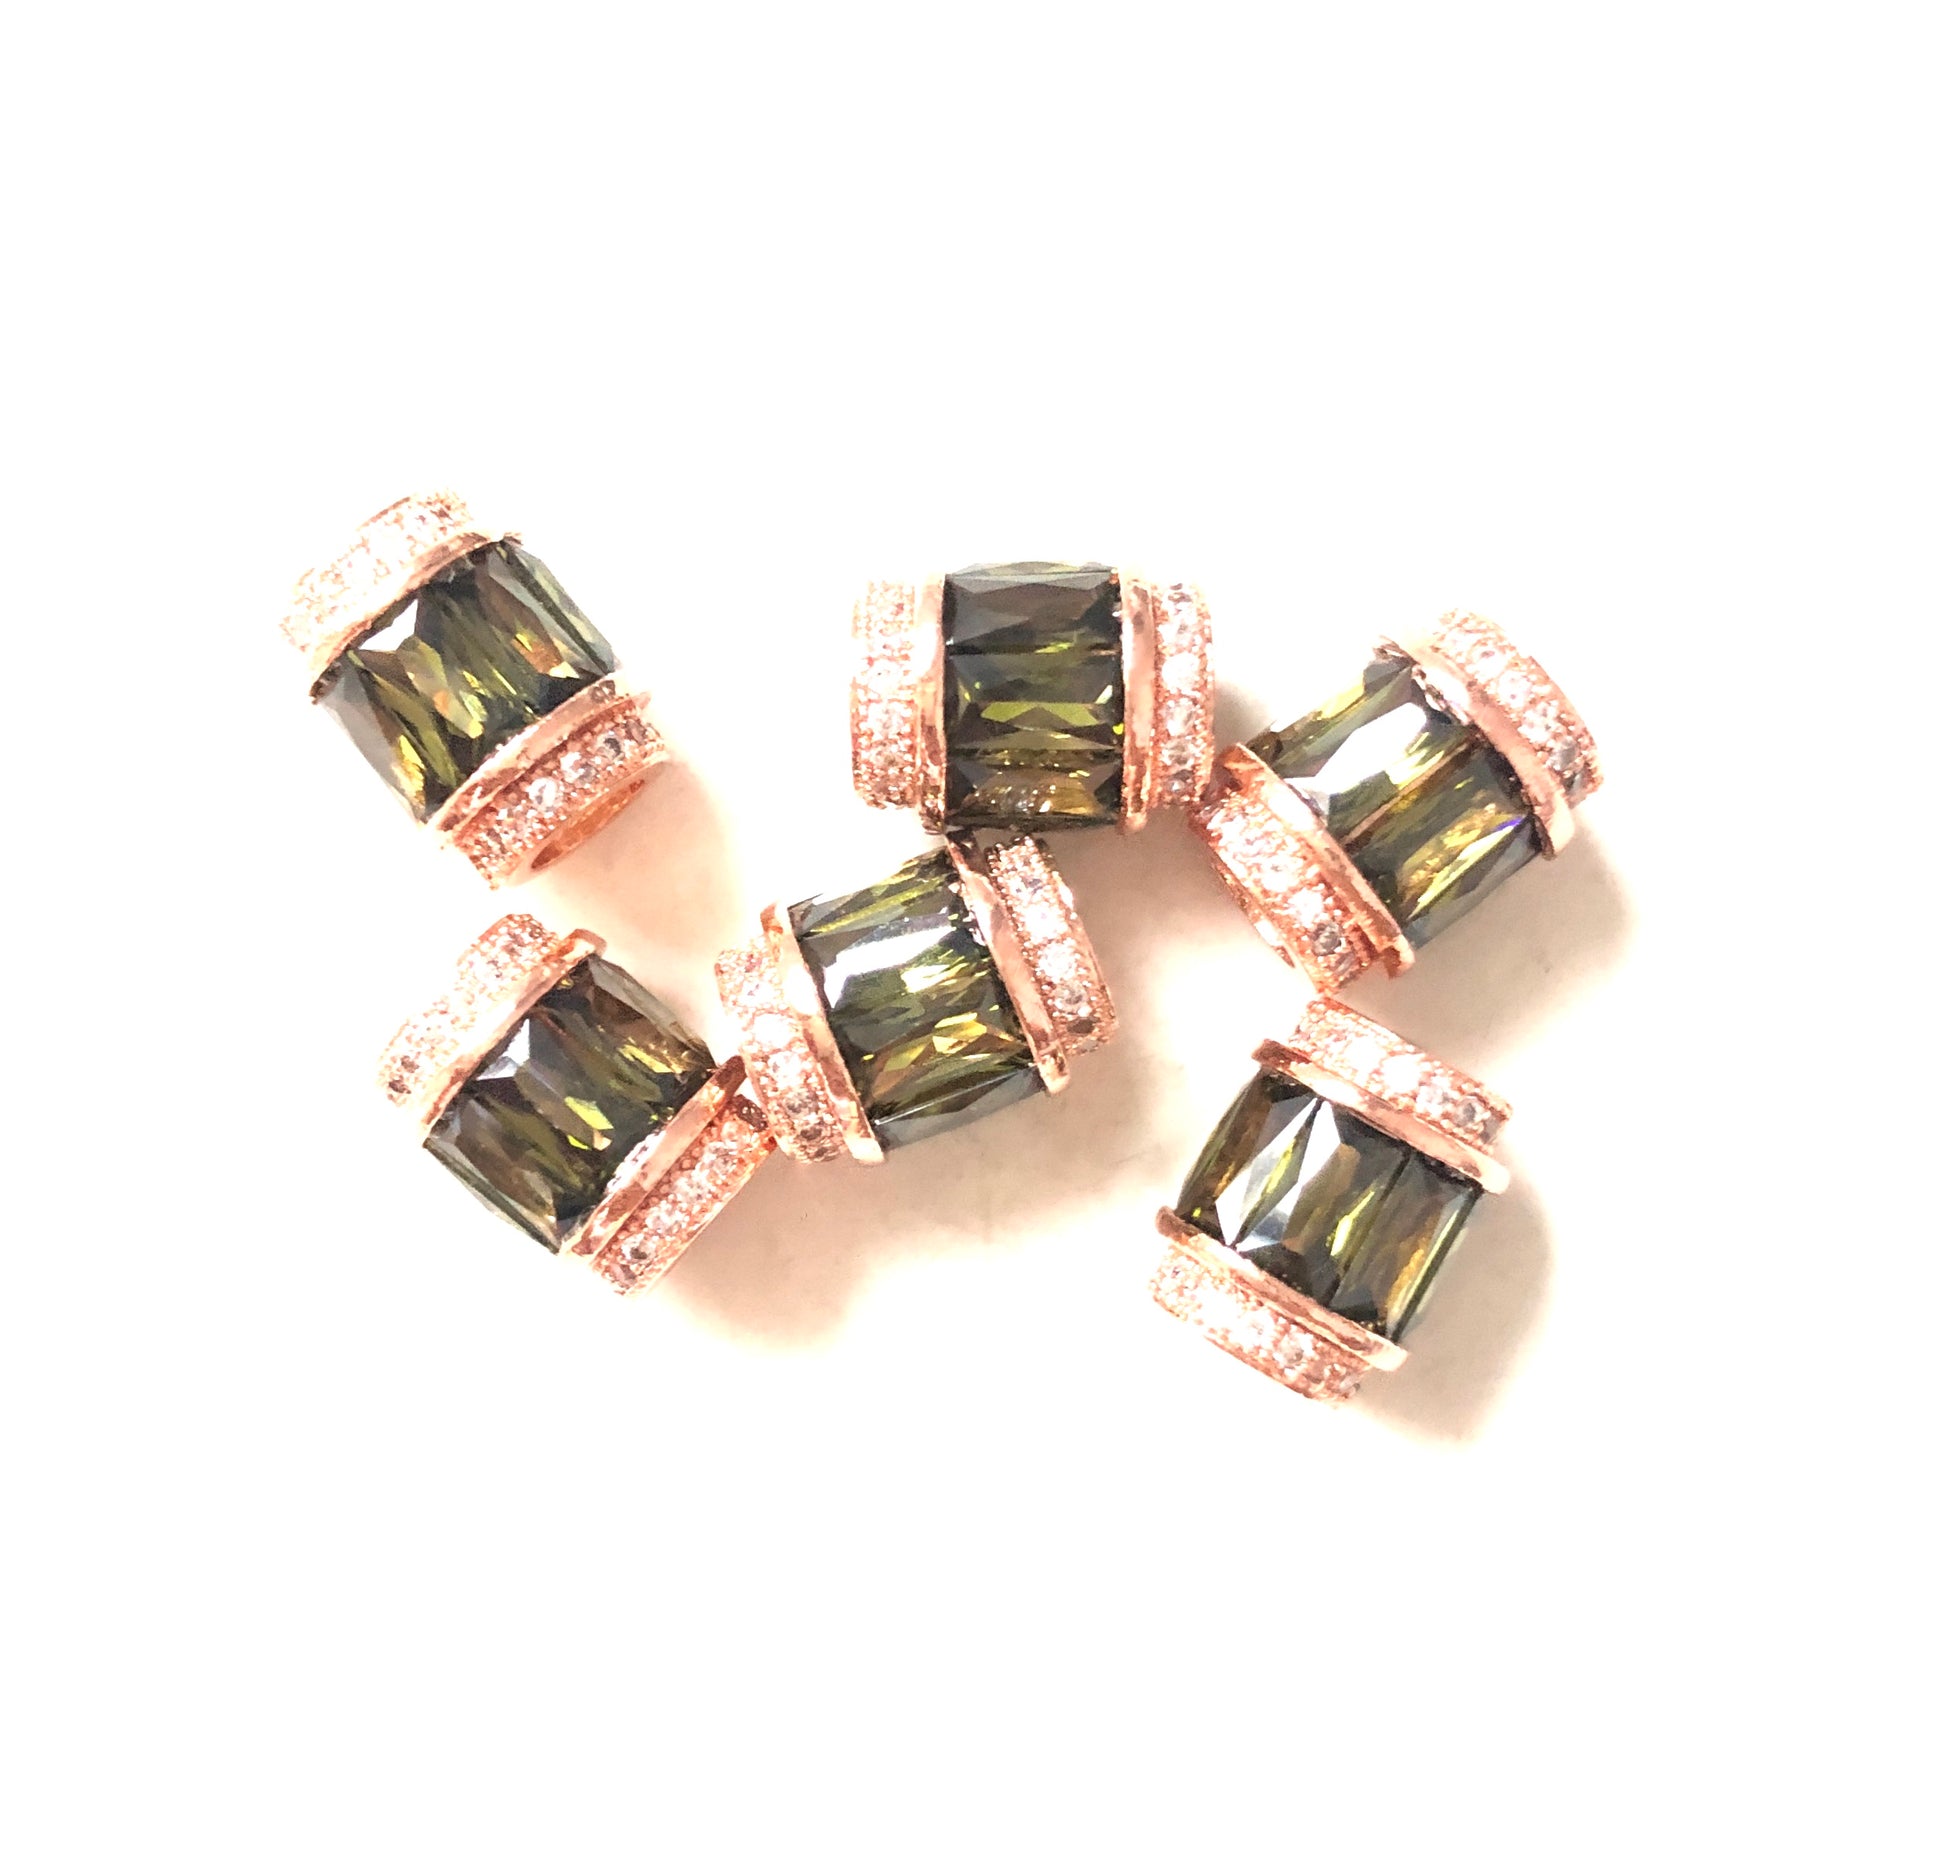 10pcs/lot 12*10mm Green CZ Paved Big Hole Spacers Rose Gold CZ Paved Spacers Big Hole Beads New Spacers Arrivals Charms Beads Beyond